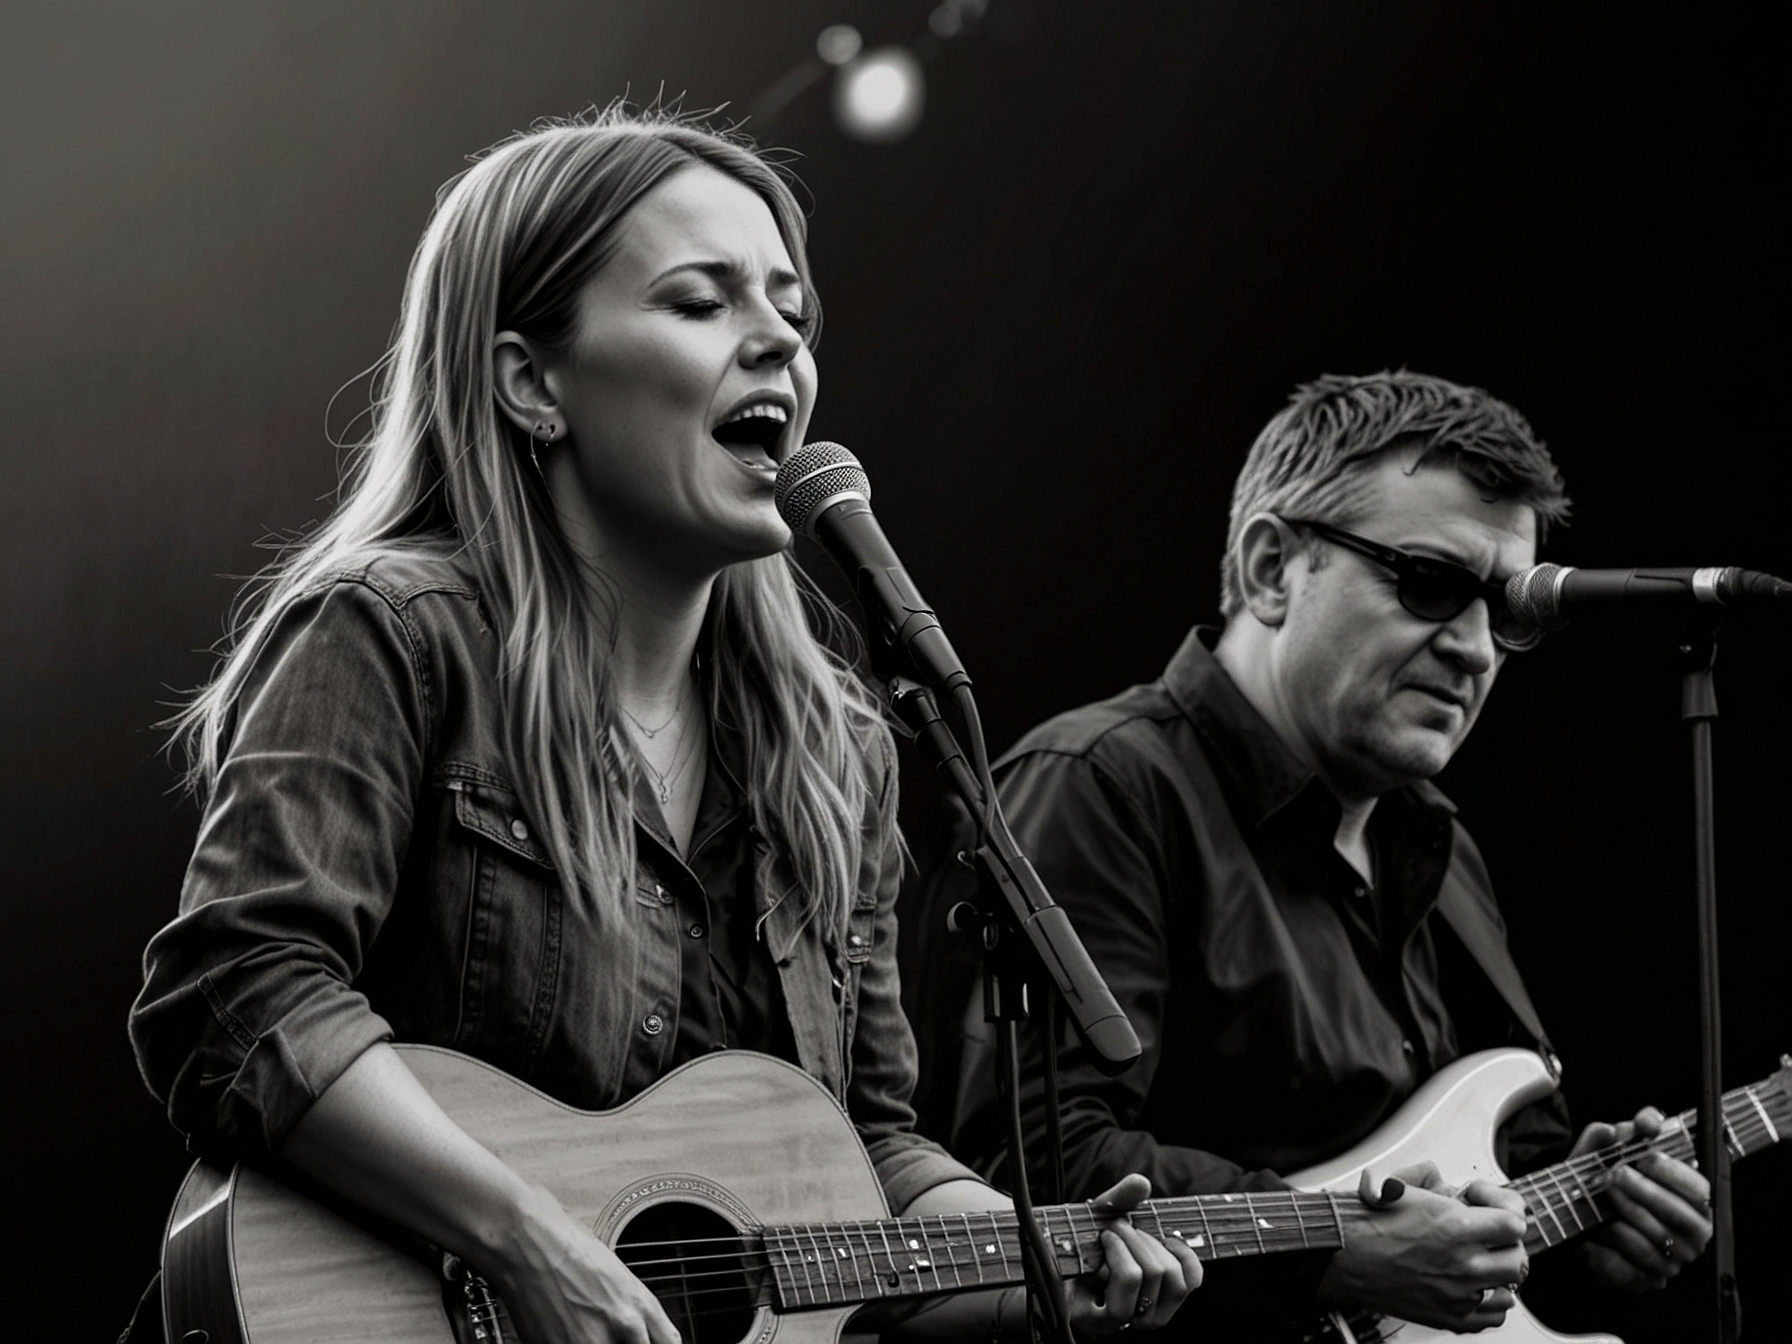 Rianne Downey, with her soulful voice and evident gratitude, performing beside Paul Heaton at Glastonbury, showcasing a striking moment of collaboration between a rising star and a seasoned musician.